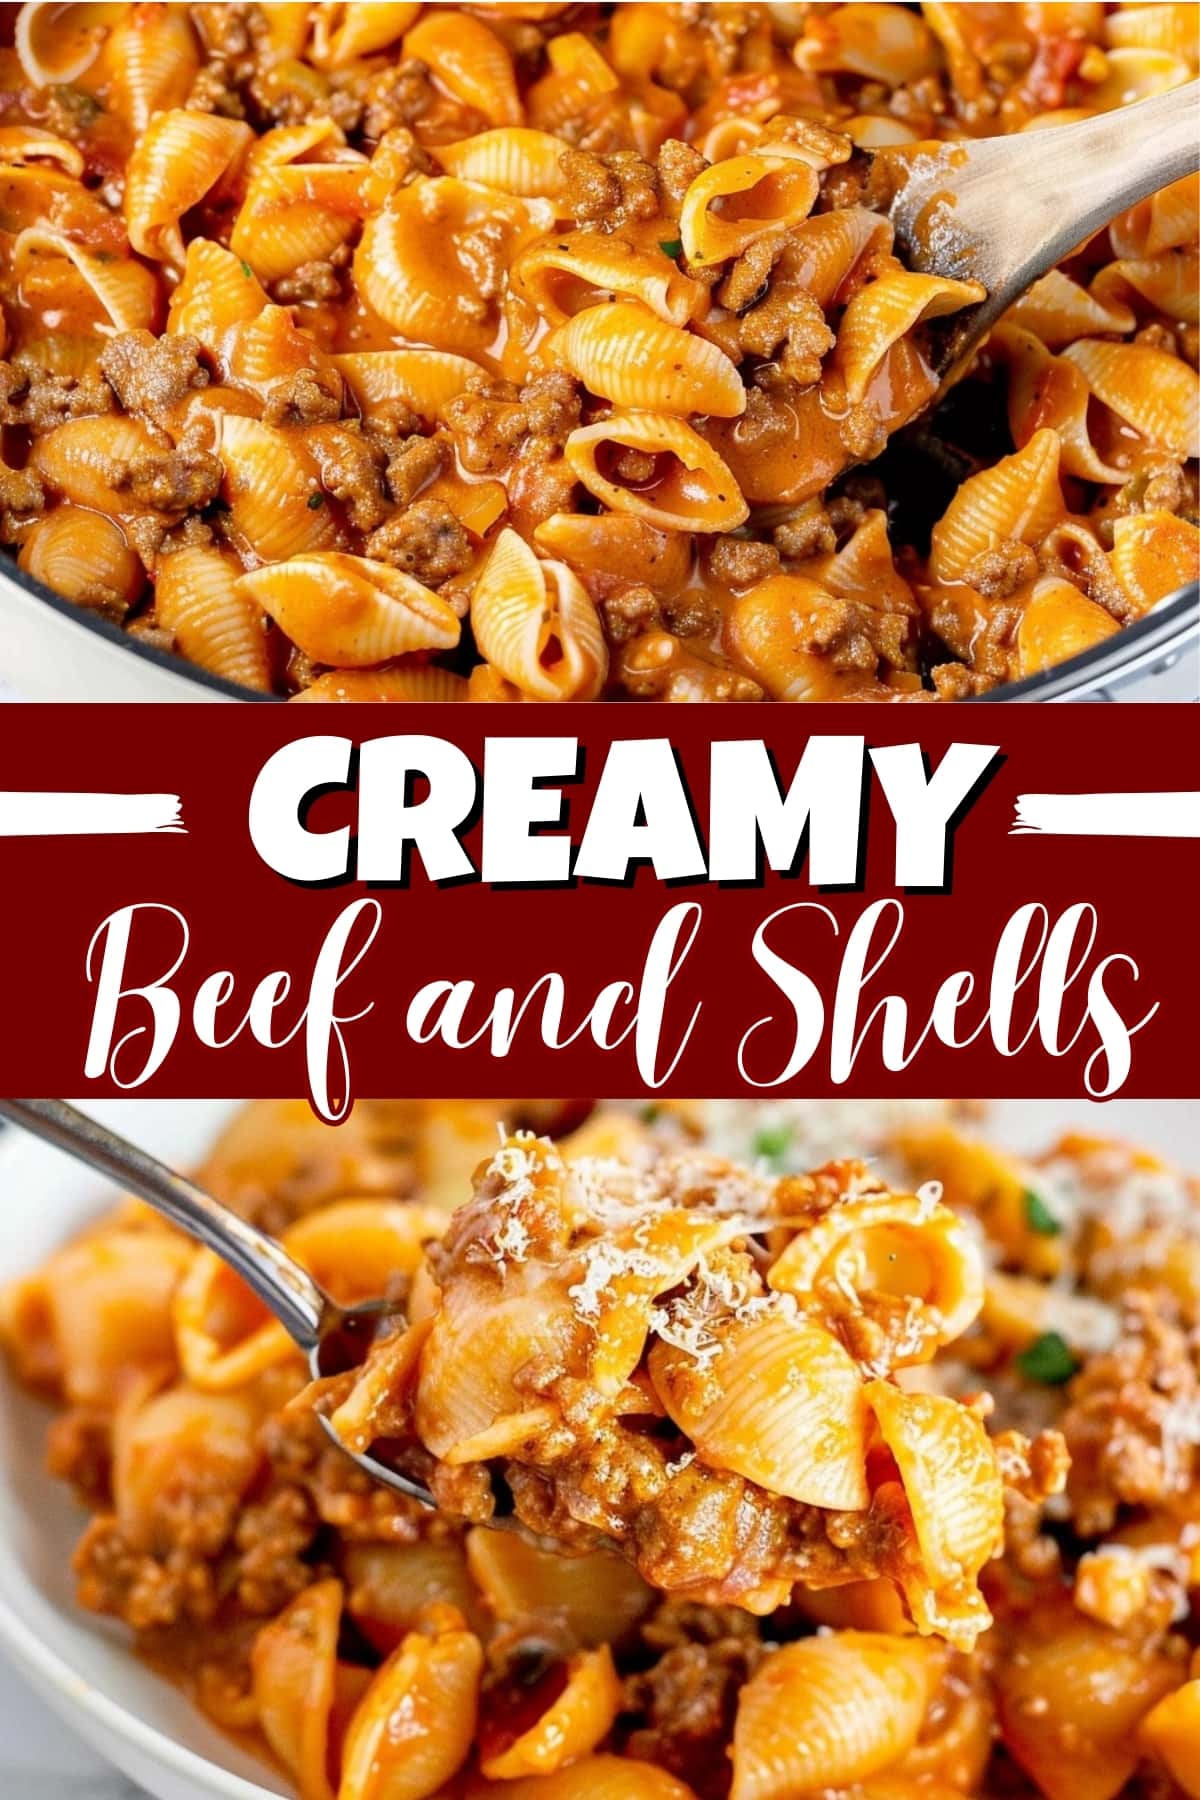 Creamy beef and shells.